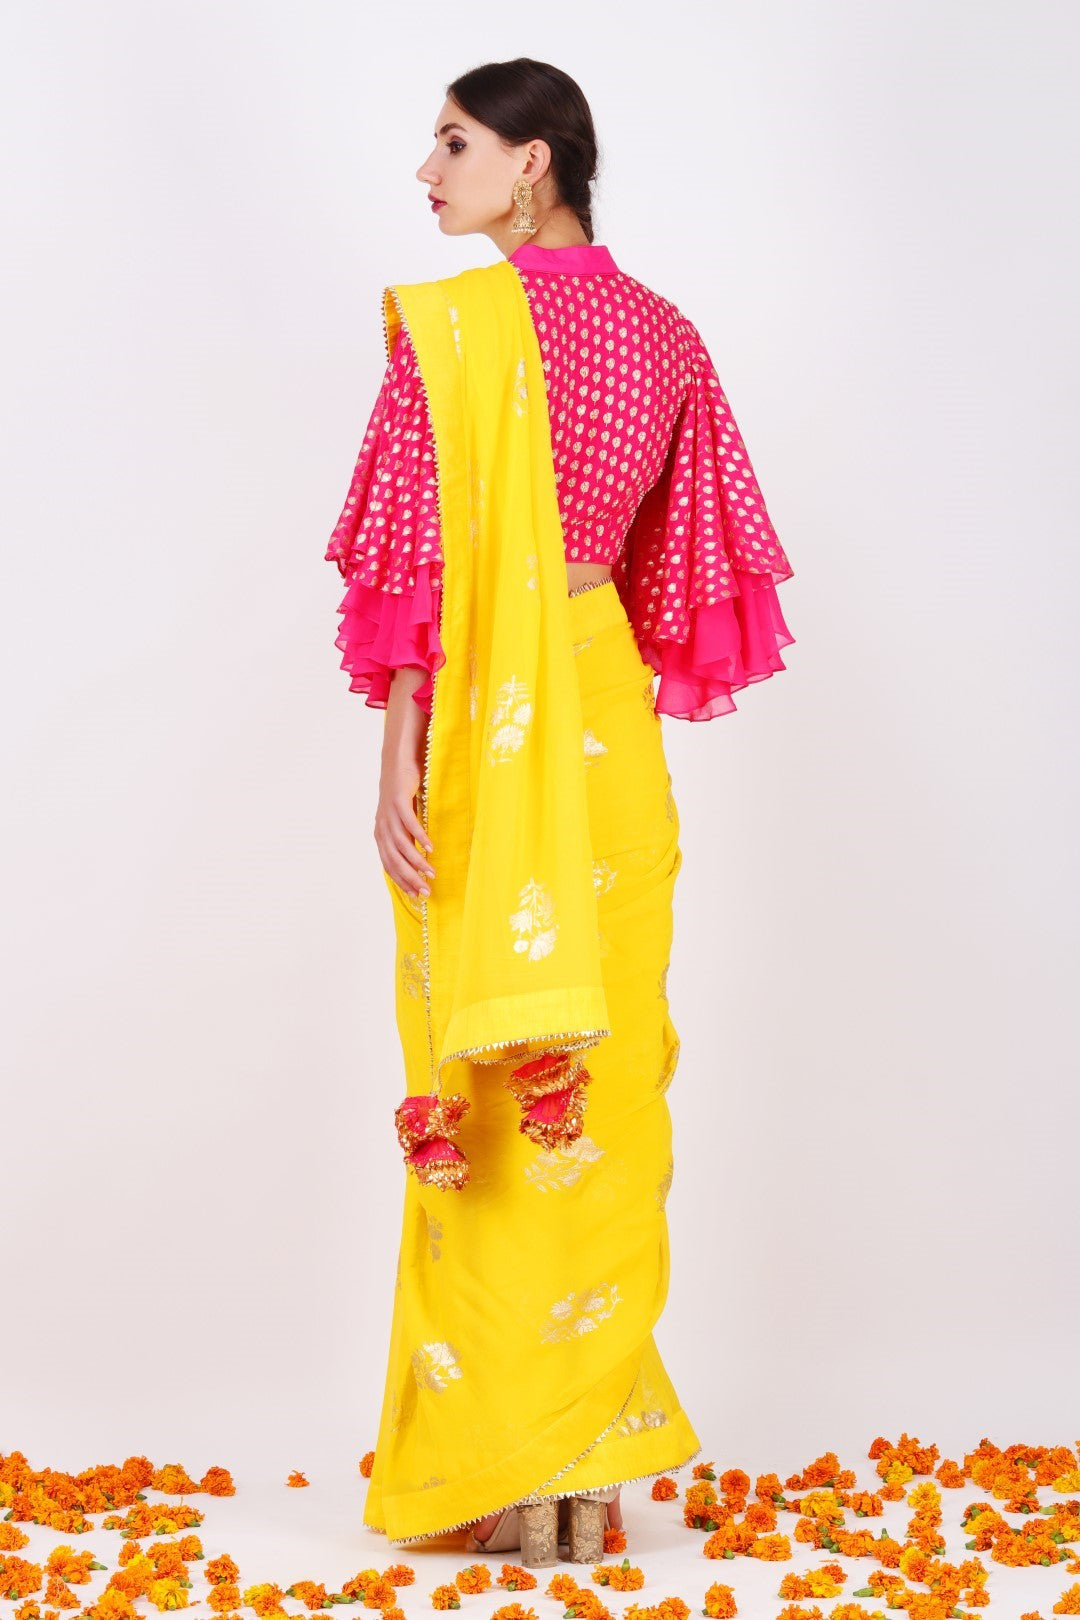 Yellow georgette foil printed sari raised neckline blouse with bell sleeves.